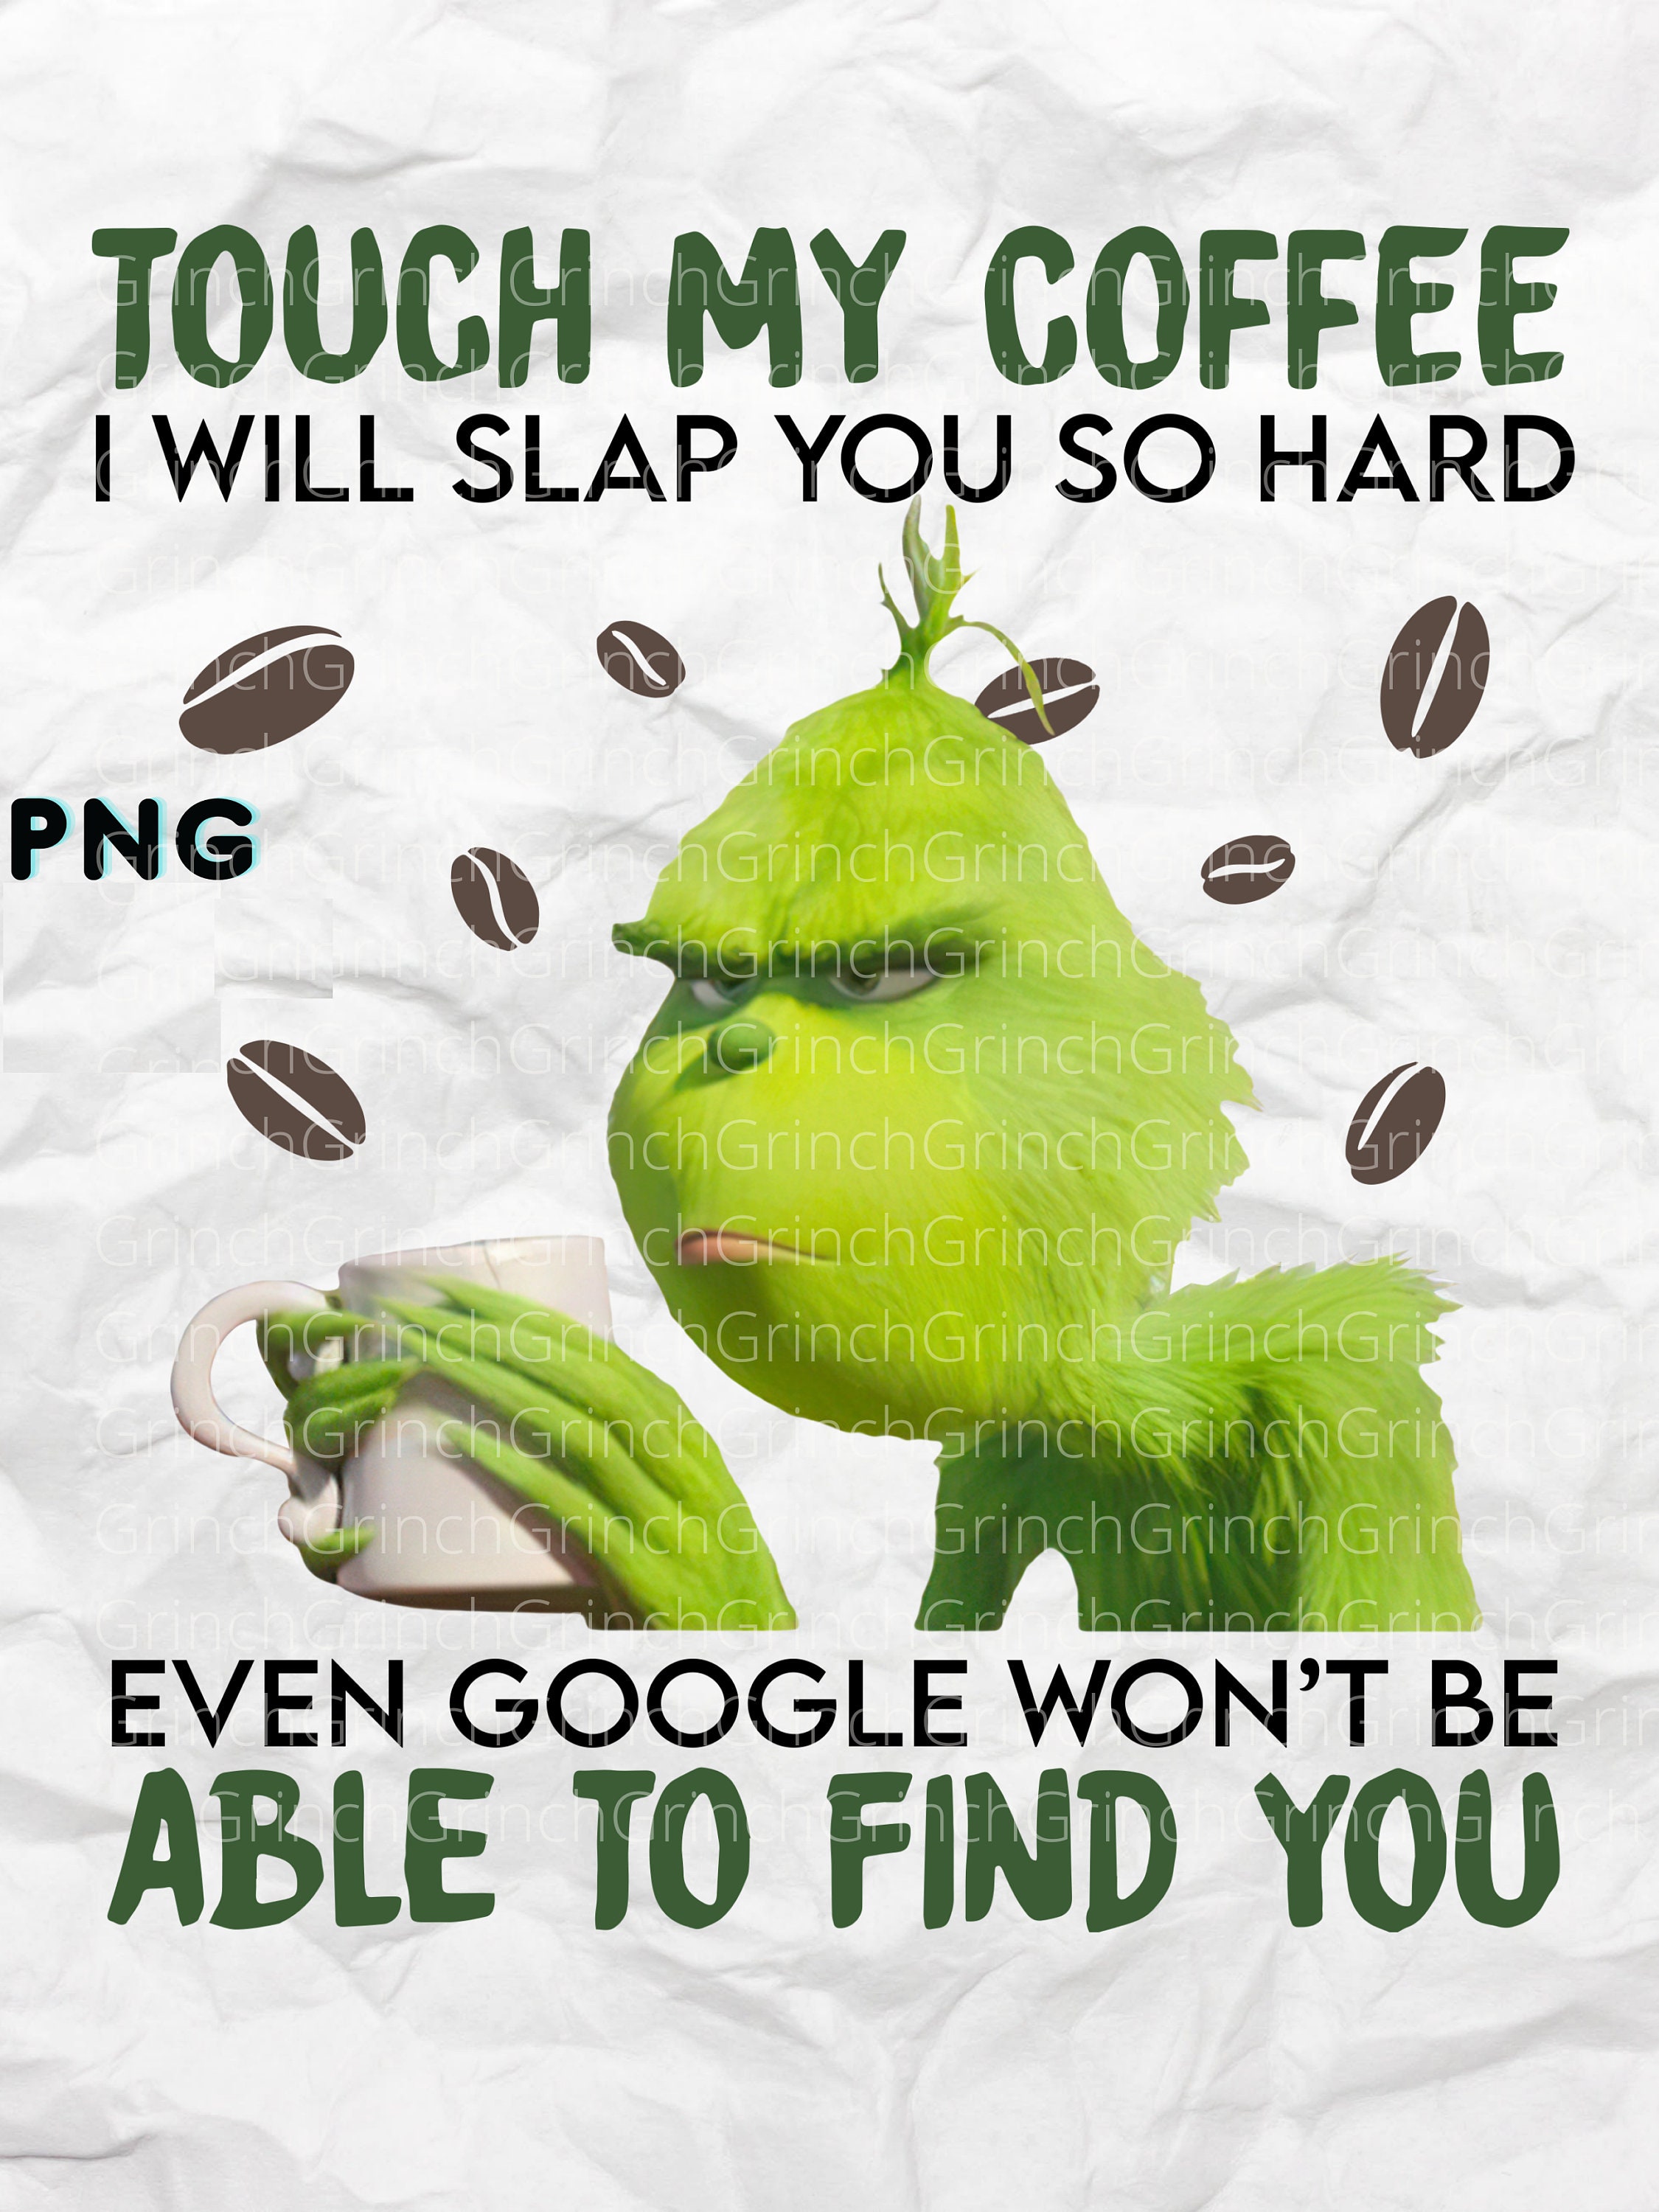 Grinch- "Touch My Coffee PNG, I Will Slap You" Grinch Drinking Co...